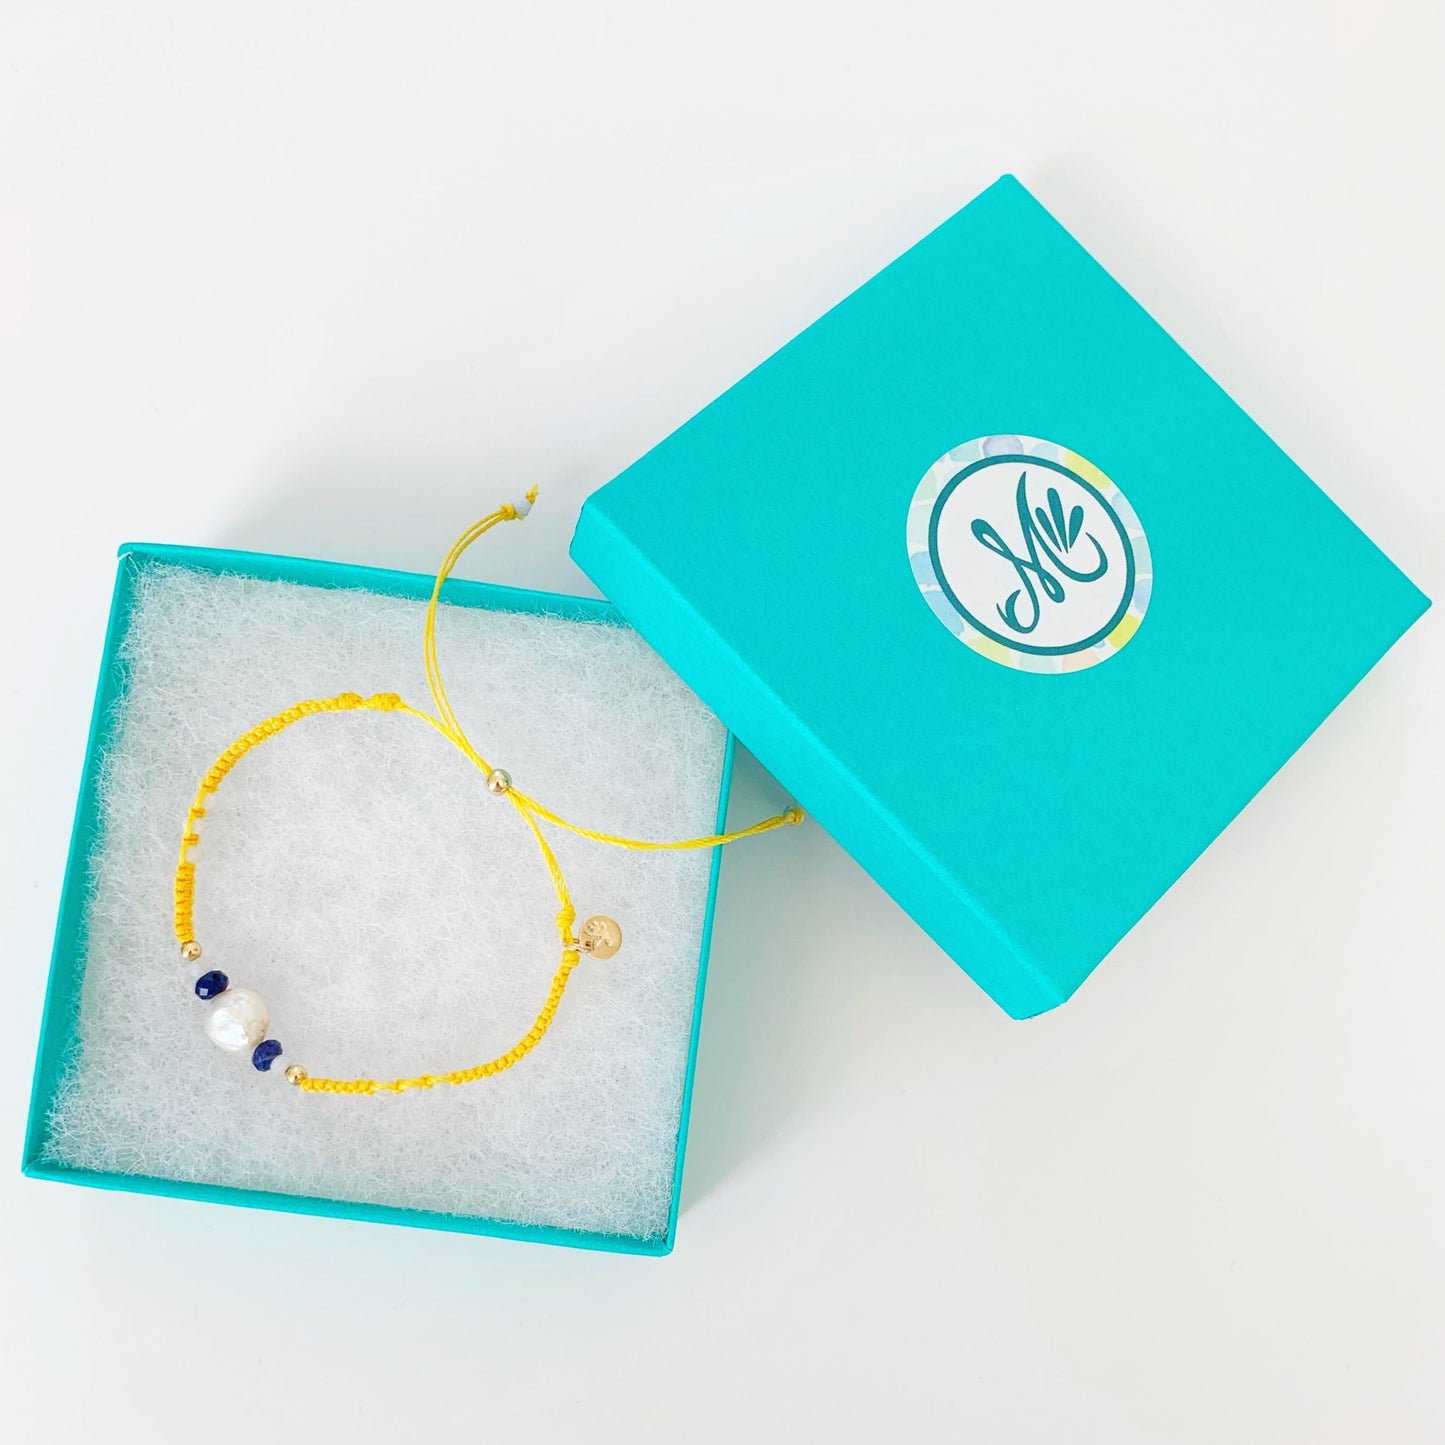 The yellow macrame bracelet is photographed in a teal mermaids and madeleines gift box on a white surface